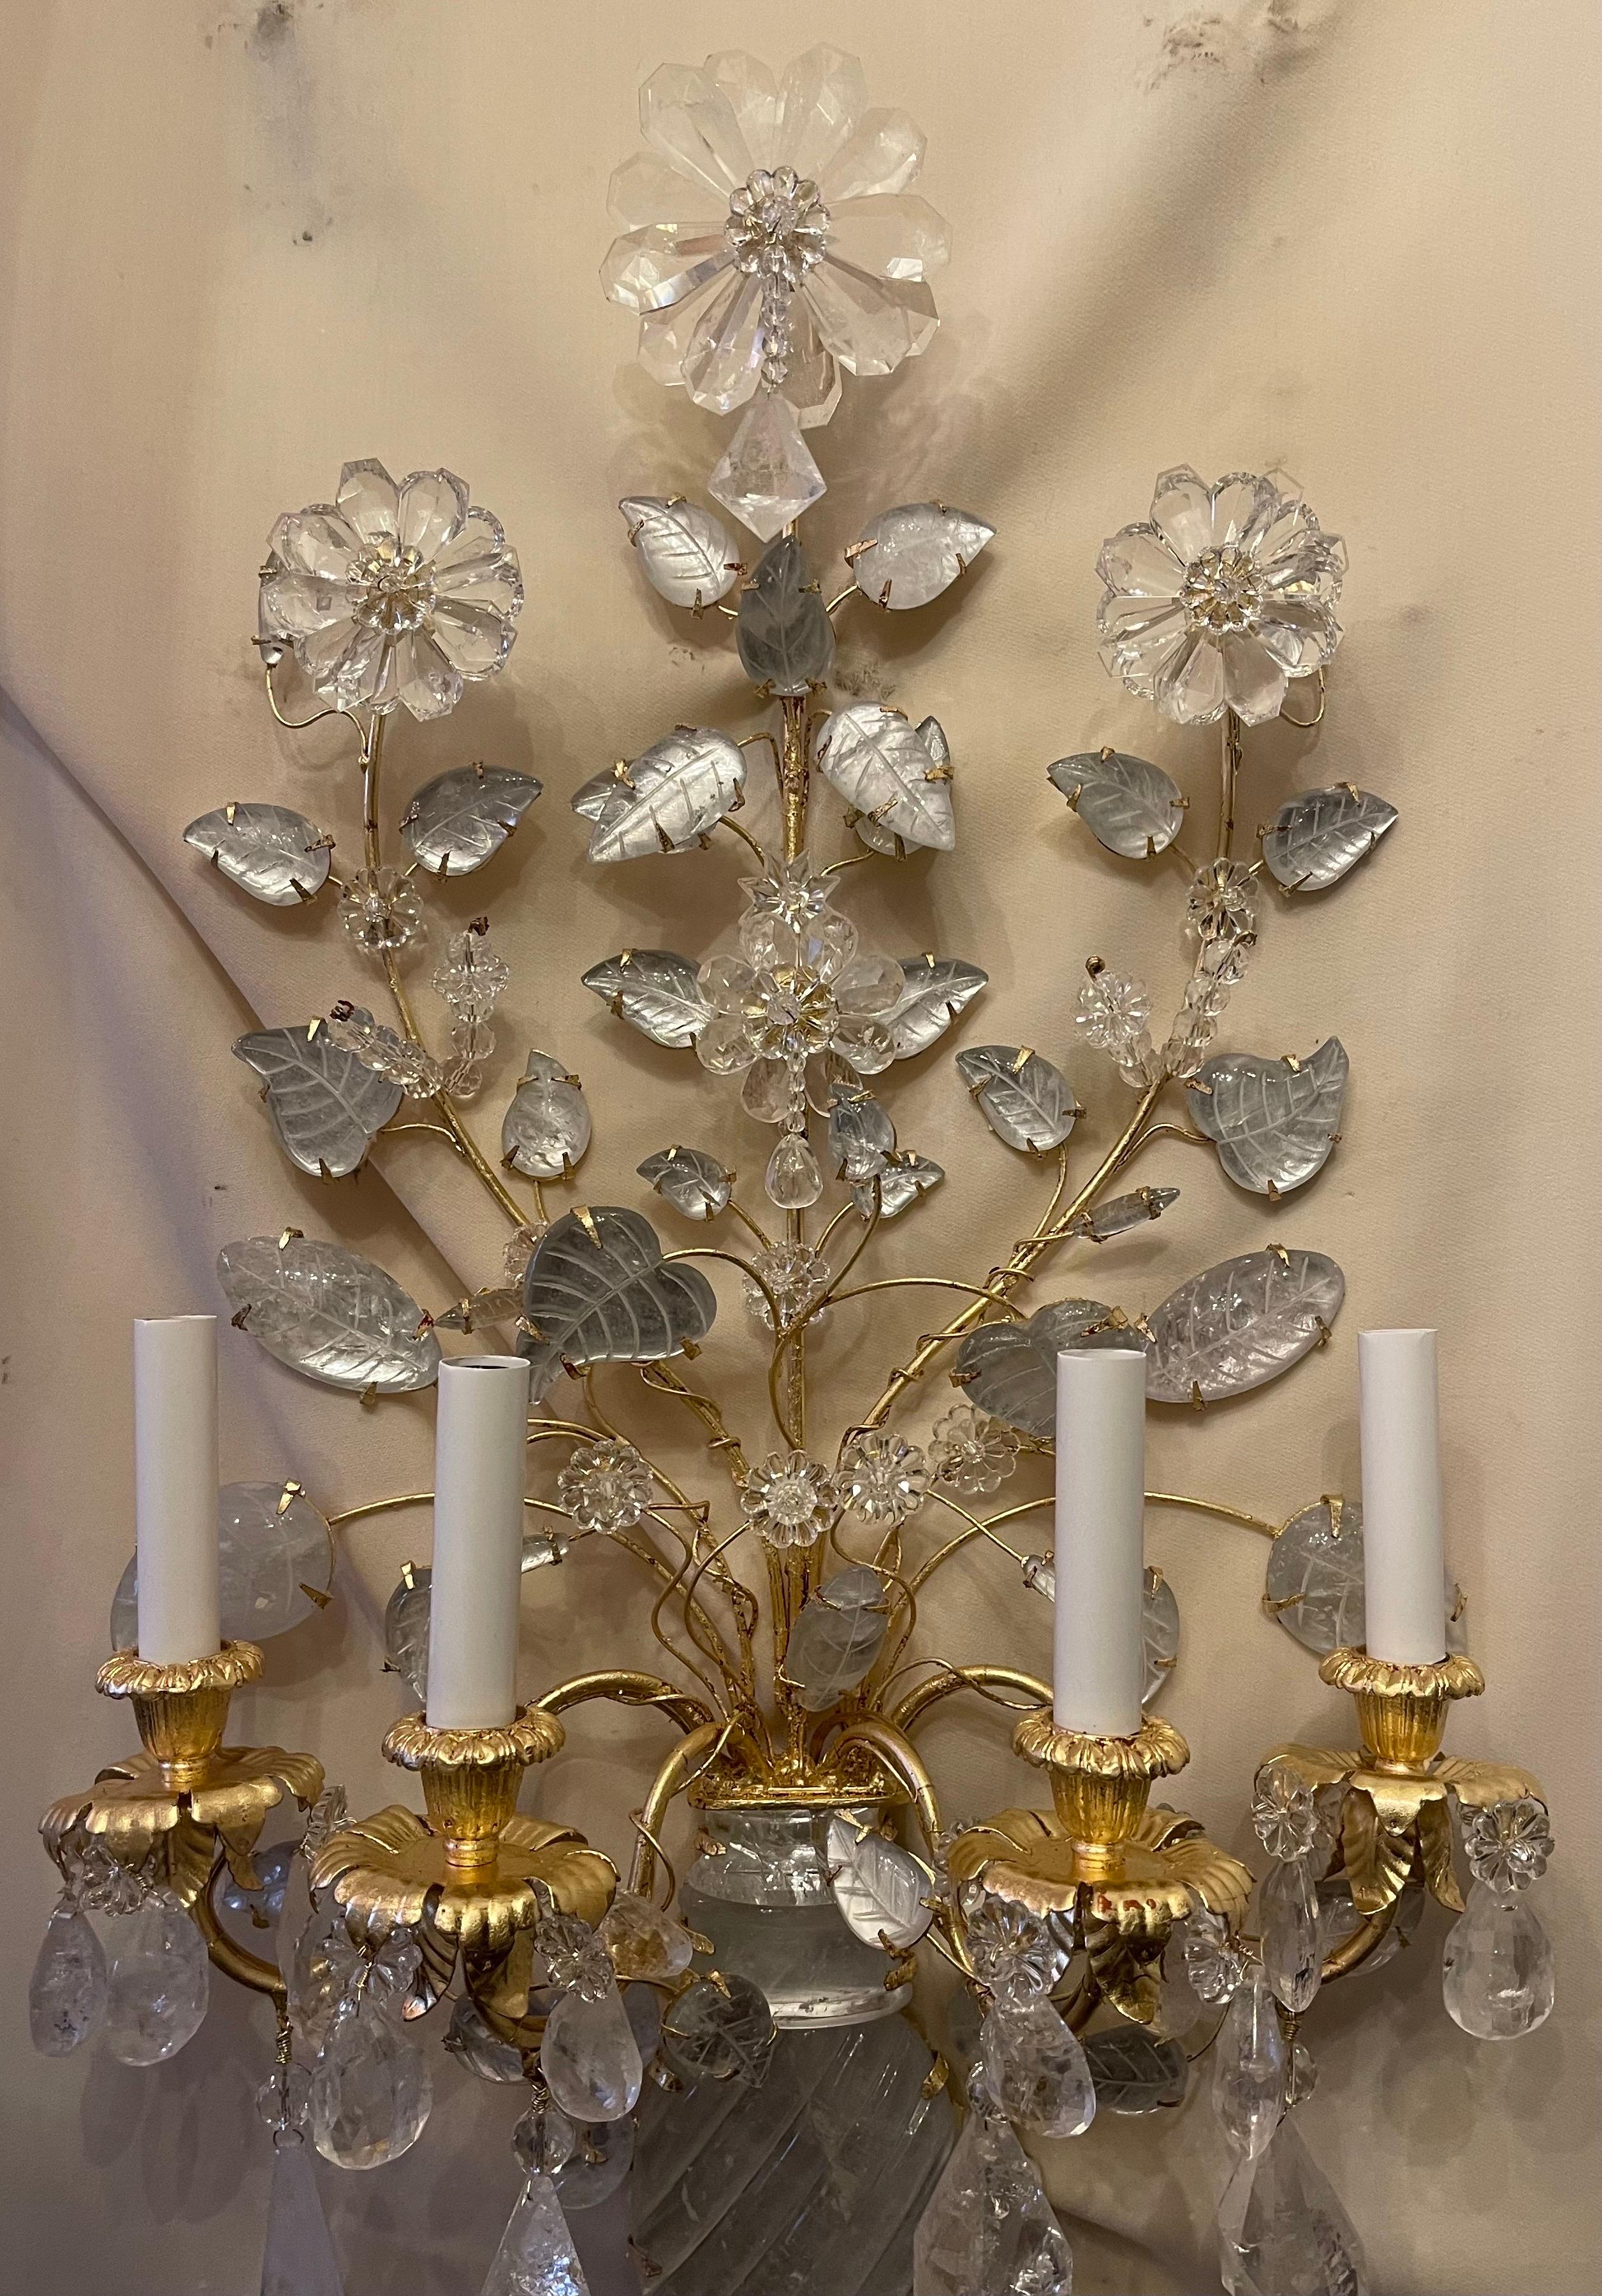 A wonderful pair of four candelabra light French gold gilt and rock crystal flower / urn form Maison Baguès style sconces, they are completely rewired.

Two pairs available